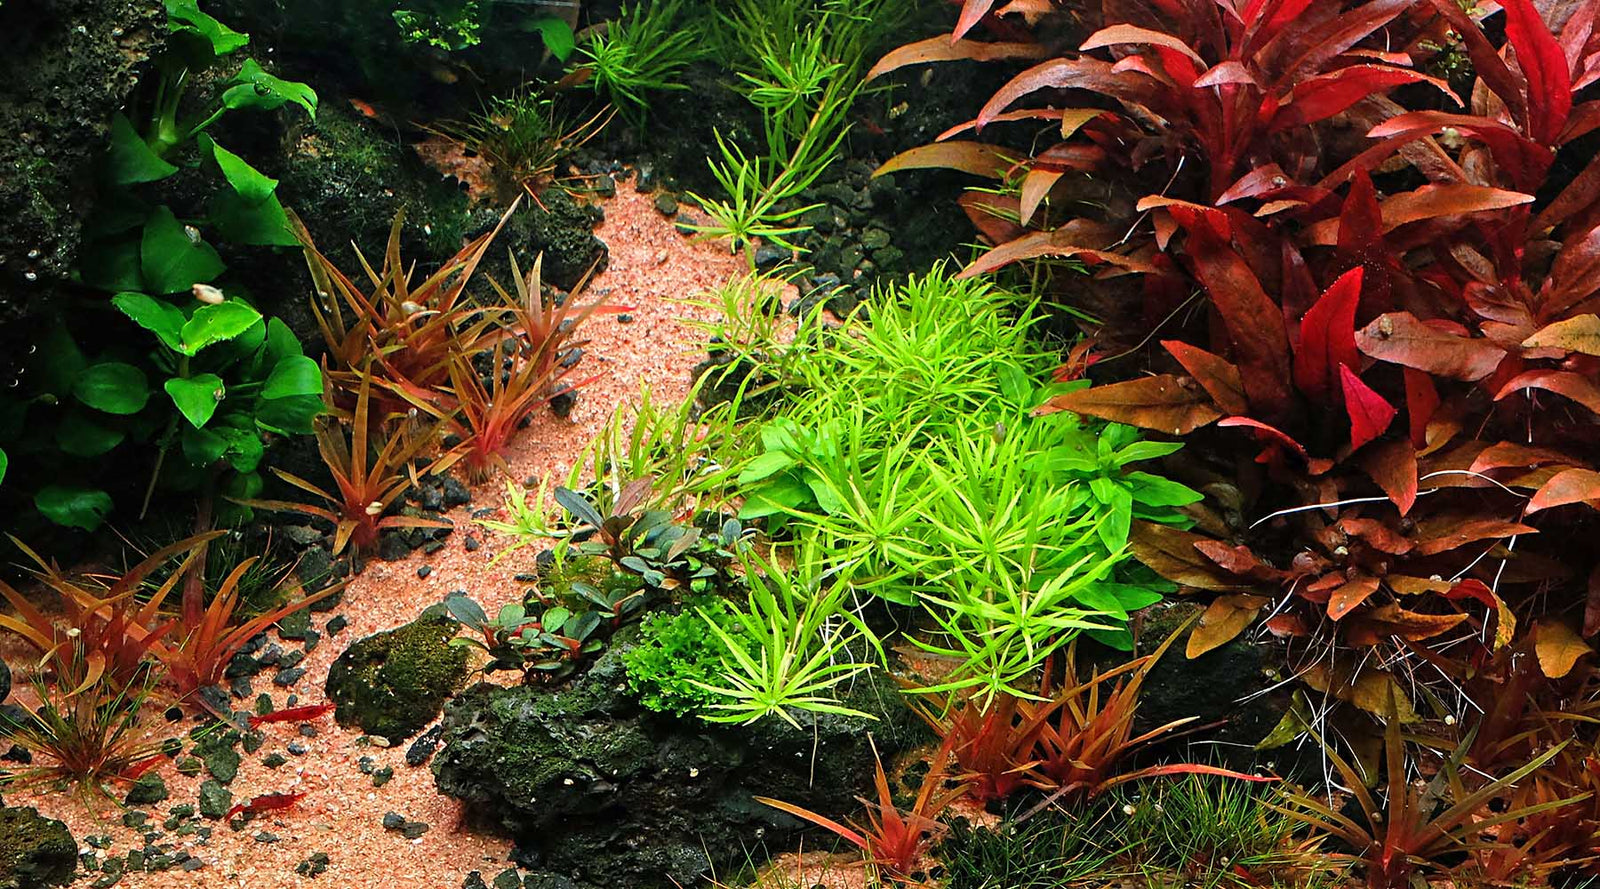 Filter media layout and sequence for planted tank - The 2Hr Aquarist